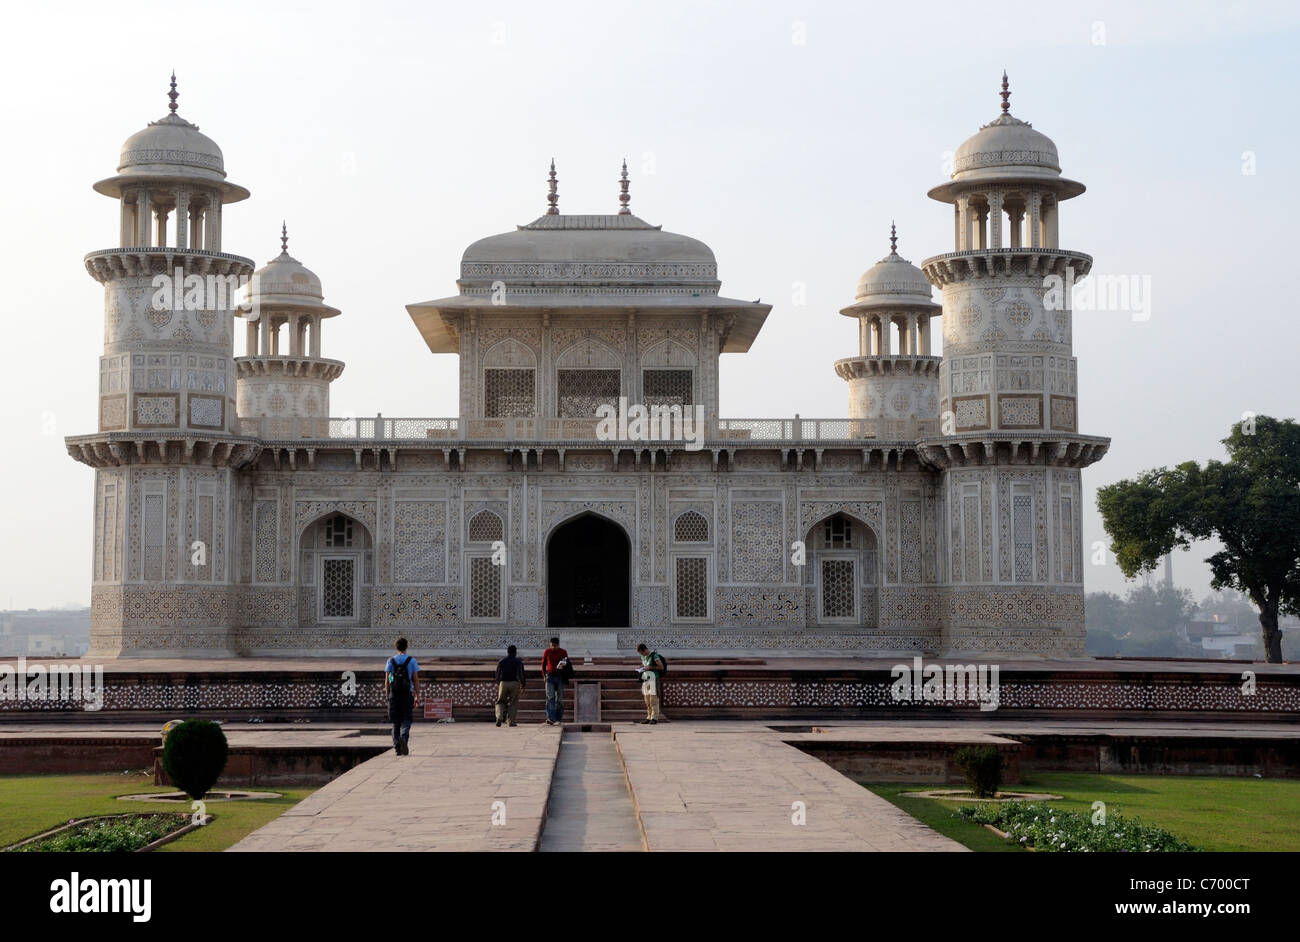 The highly ornate white marble  Tomb of Itimad ud Daulah whose name was Mirza Ghiyas Beg and his wife Asmat Begum. Agra, Stock Photo